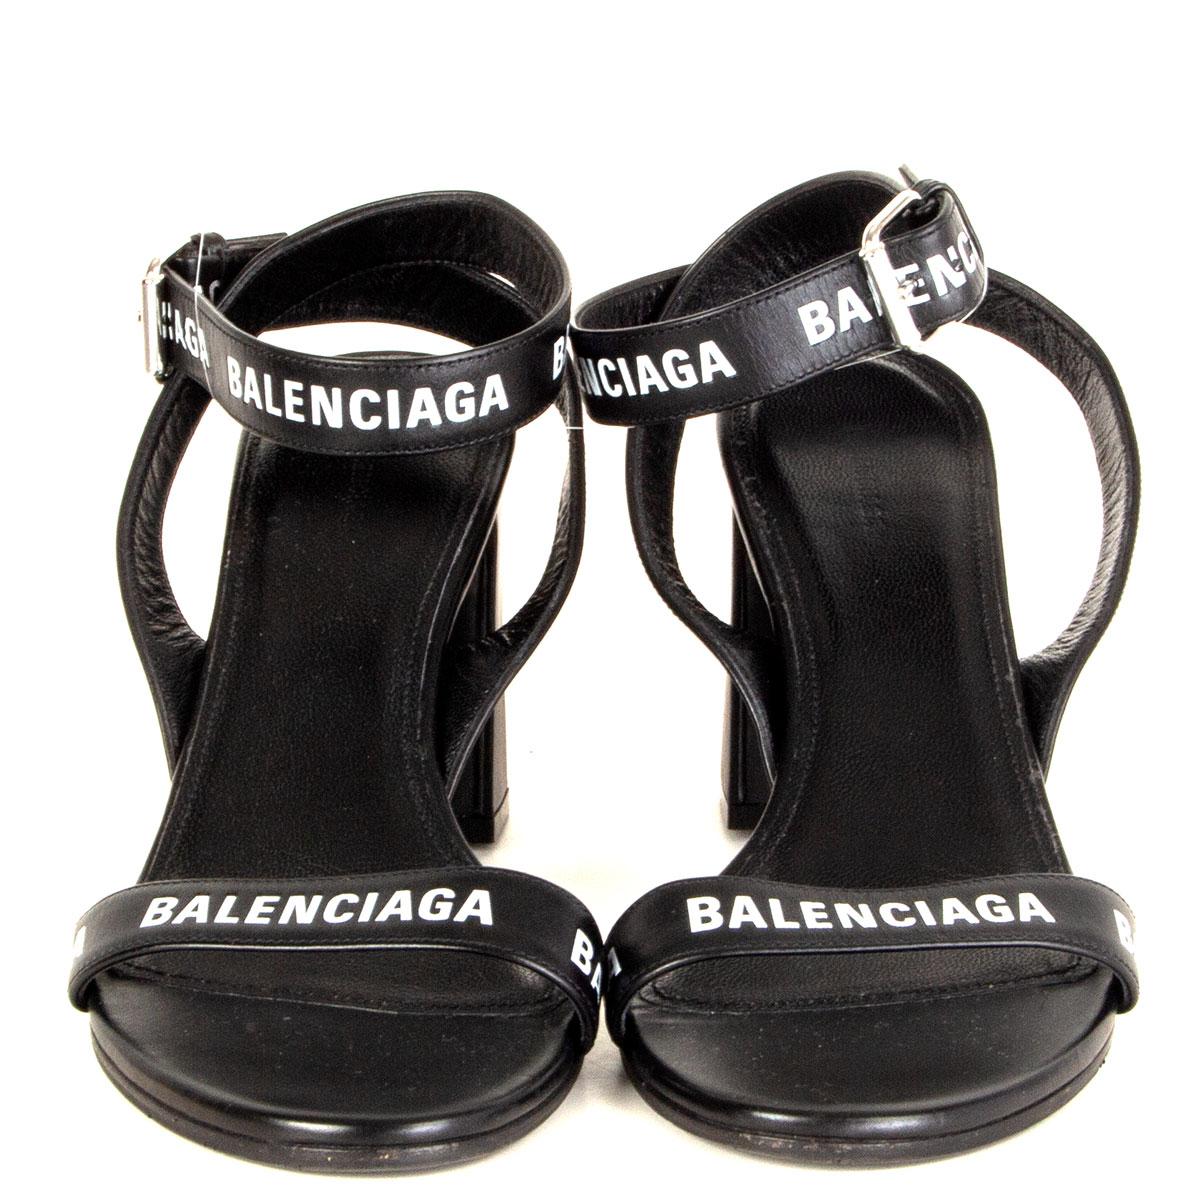 100% authentic Balenciaga sandals in black leather featuring logo lettering marches across the straps. Have been worn and are in excellent condition. Come with dust bag. 

Measurements
Imprinted Size	36.5
Shoe Size	36.5
Inside Sole	23.5cm